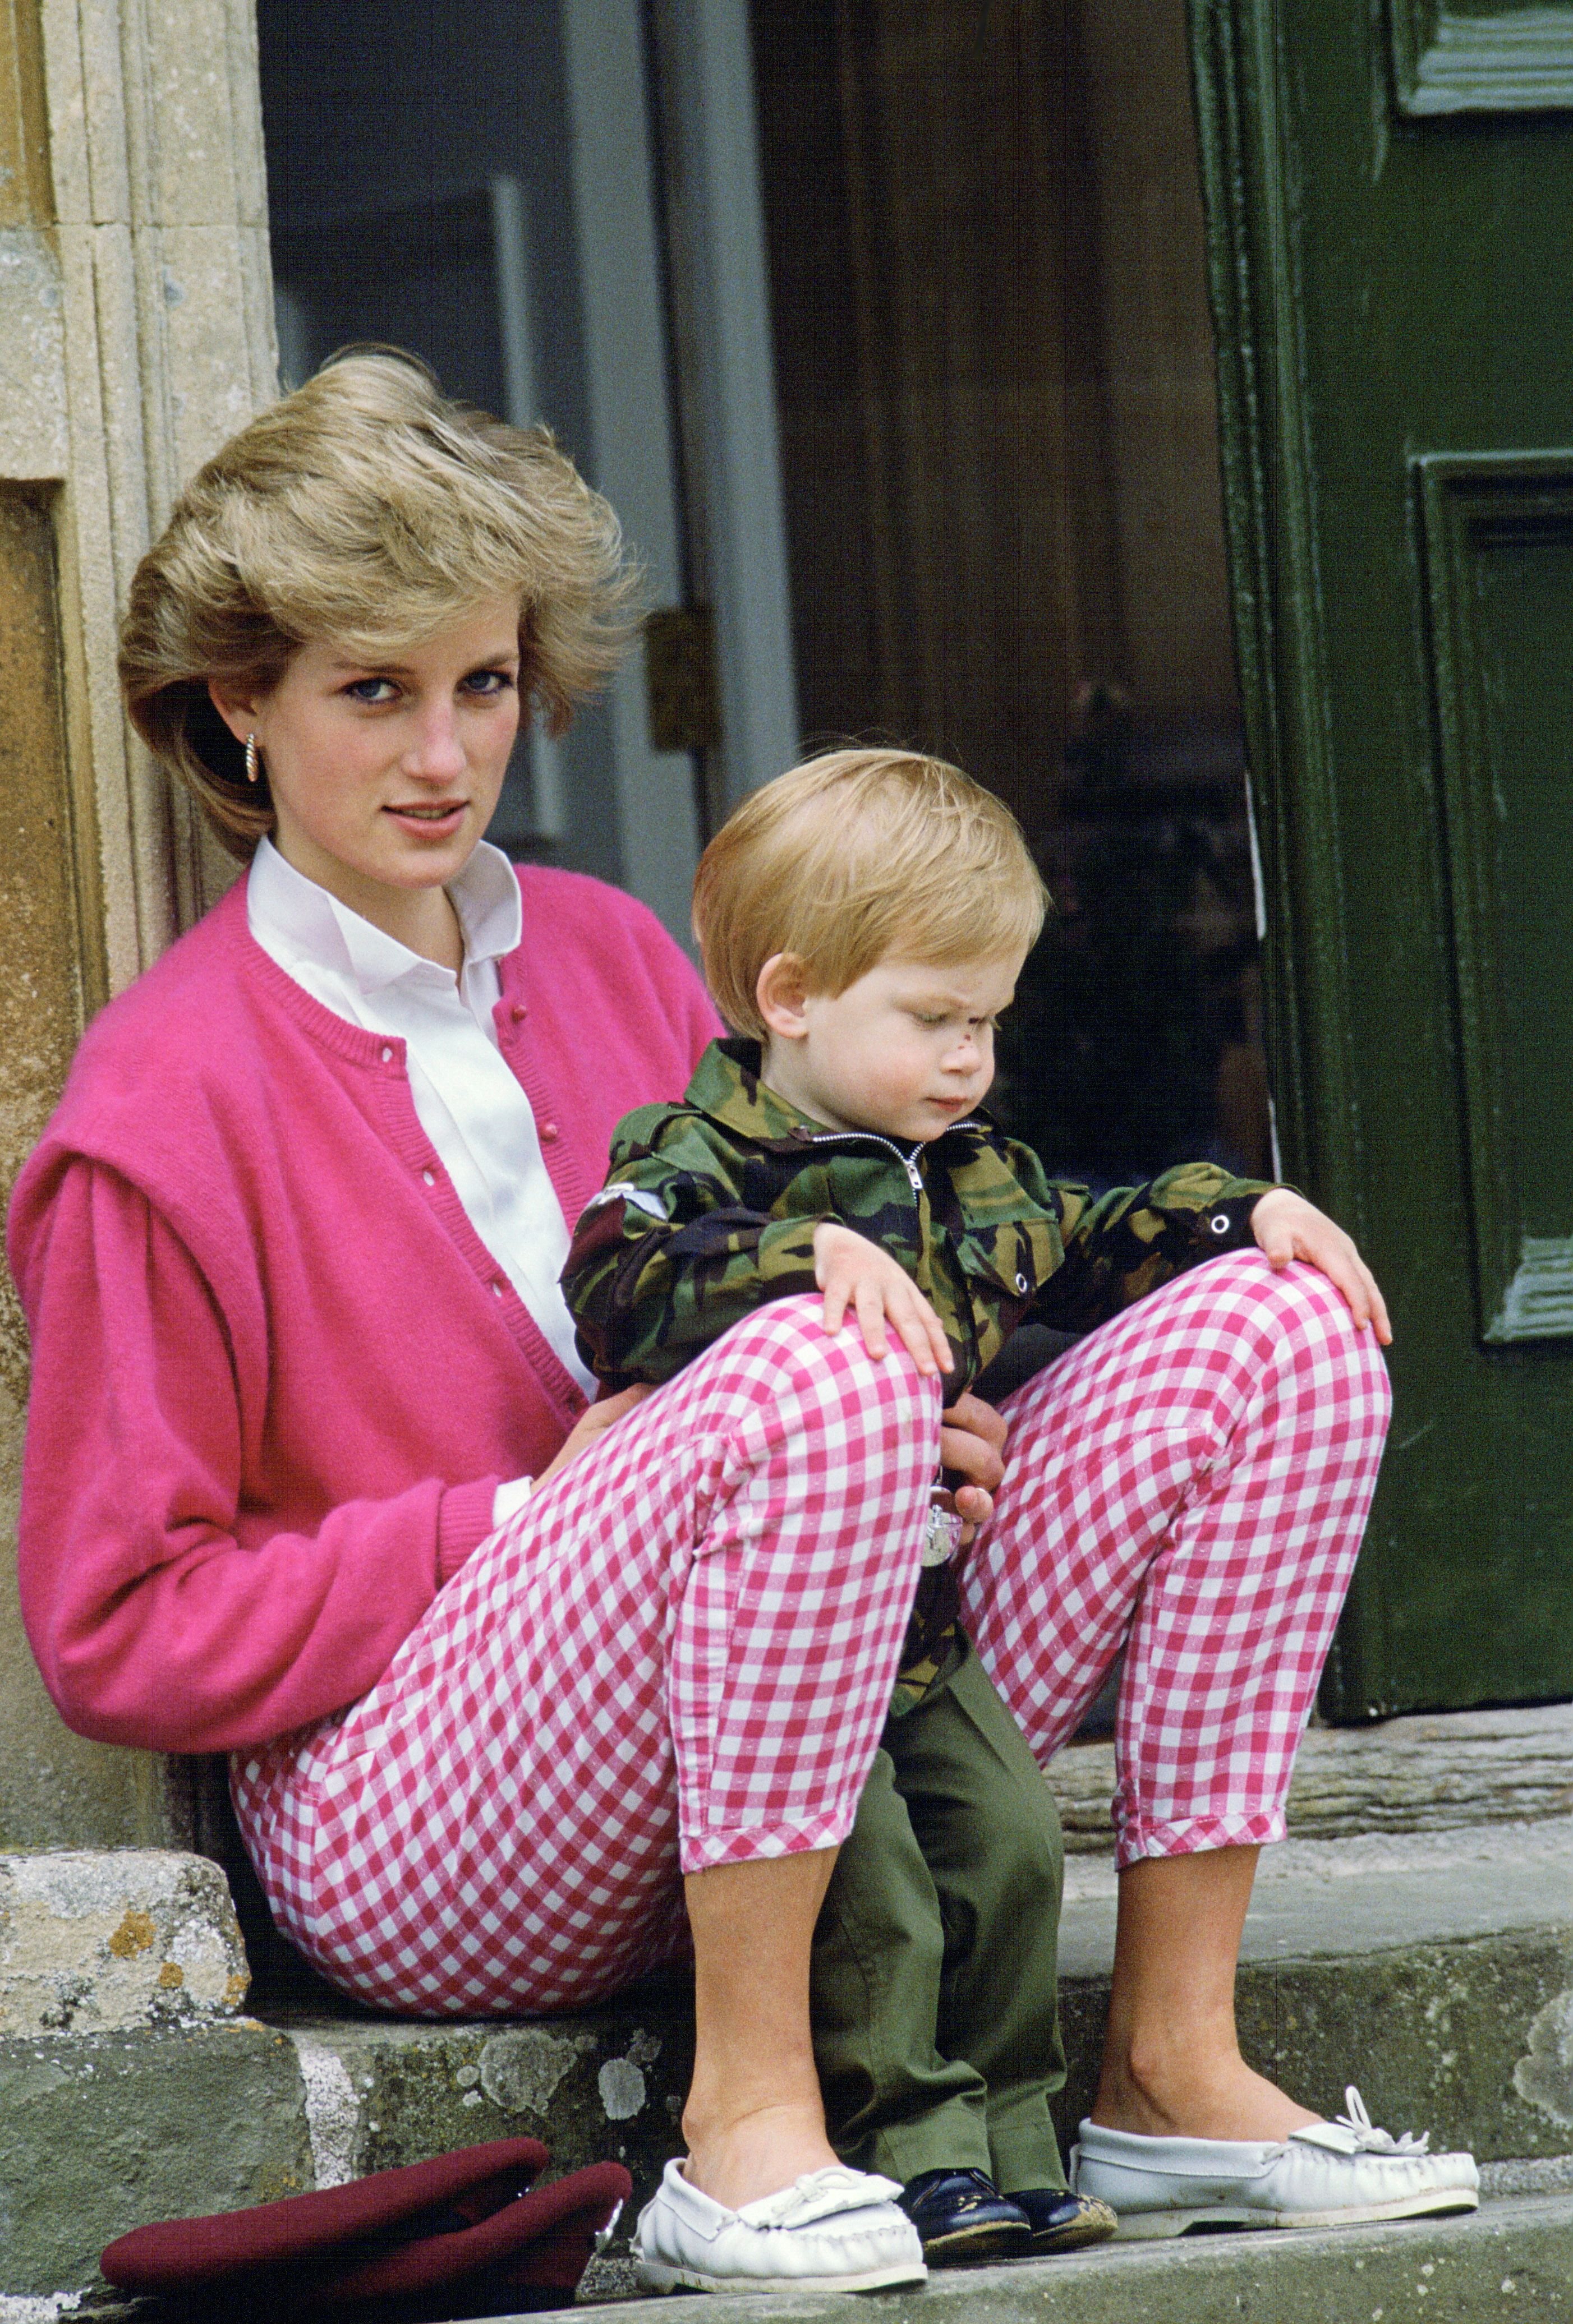 Princess Diana and Prince Harry sitting outside Highgrove in Tetbury, United Kingdom on July 18, 1986 | Photo: Tim Graham Photo Library/Getty Images